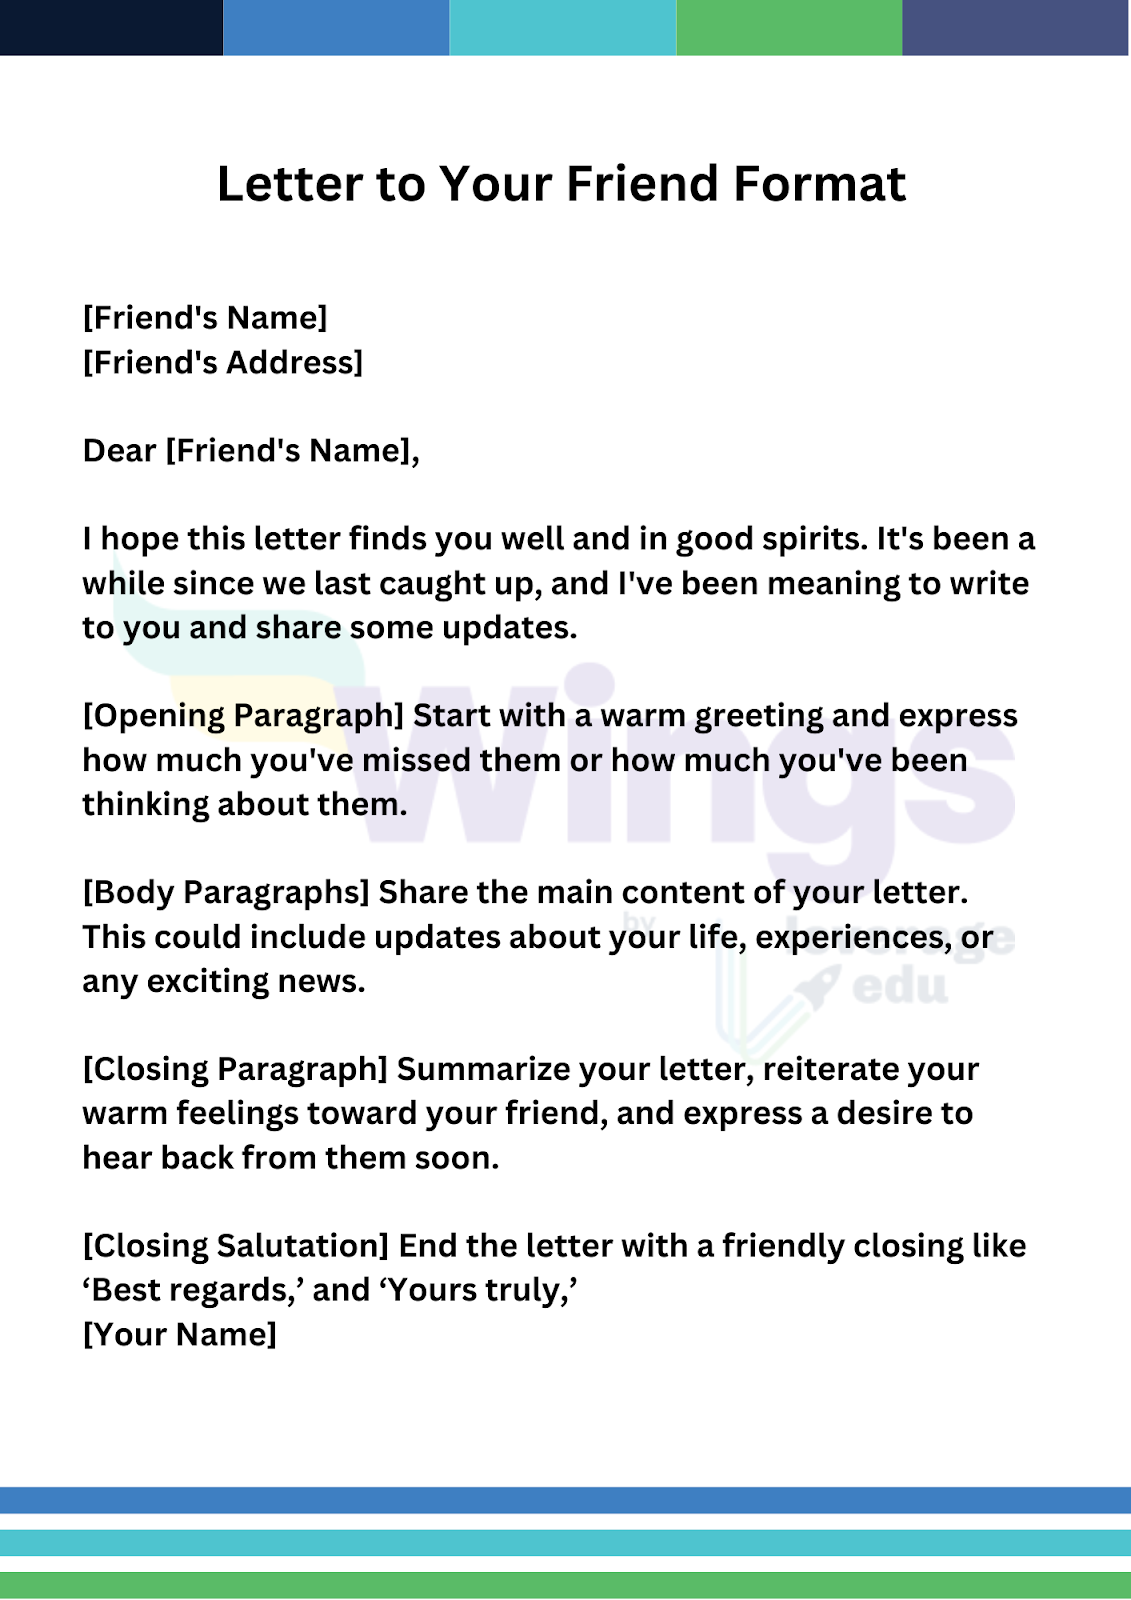 Letter to a Friend Format